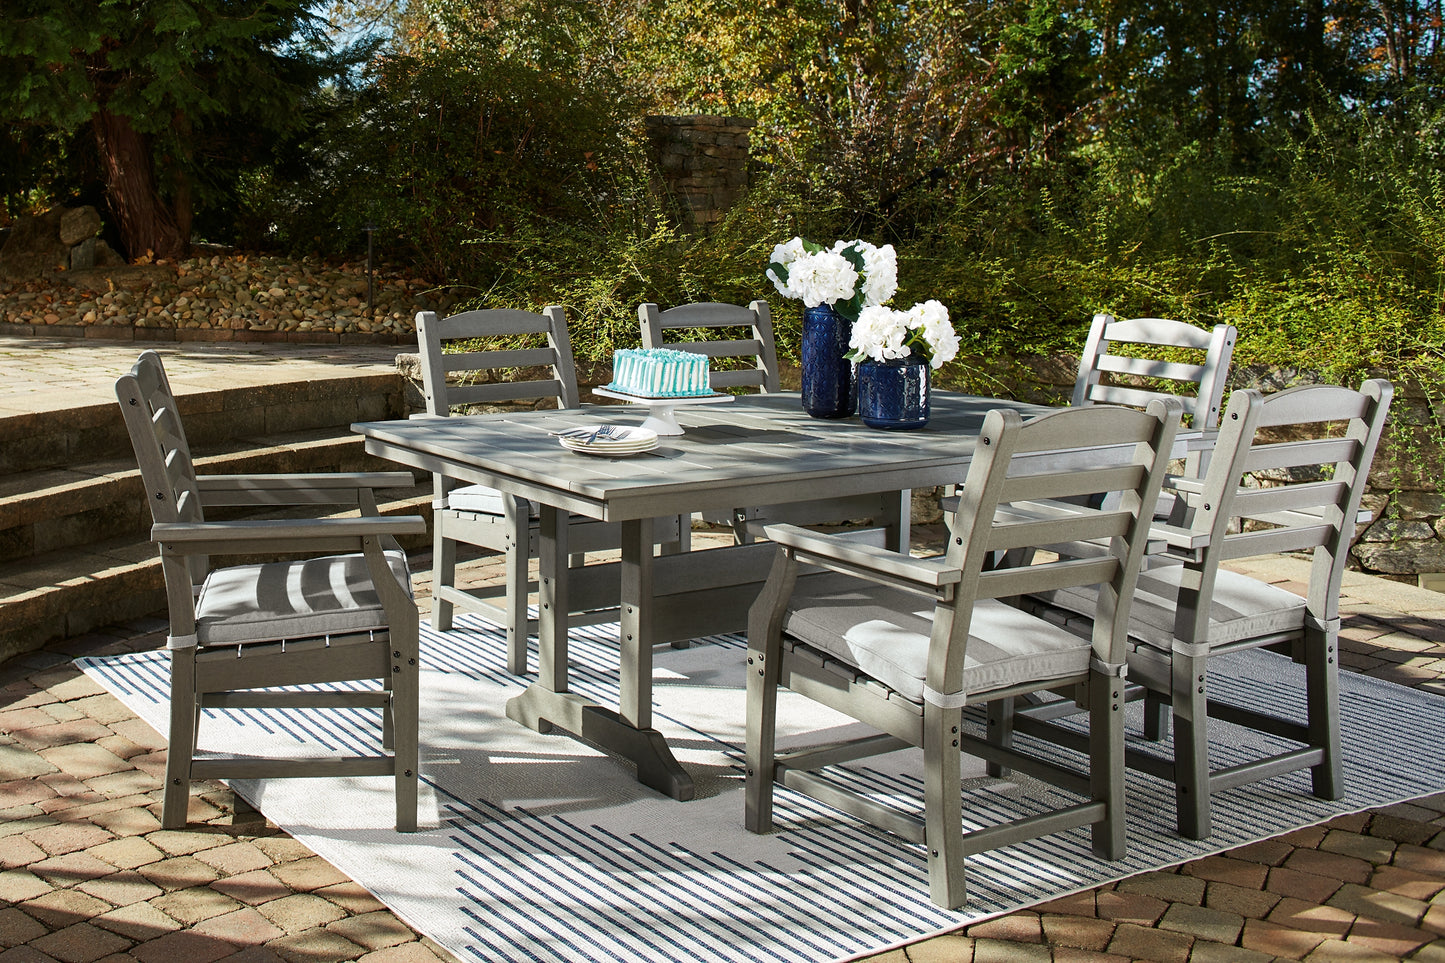 Visola Outdoor Dining Table and 6 Chairs